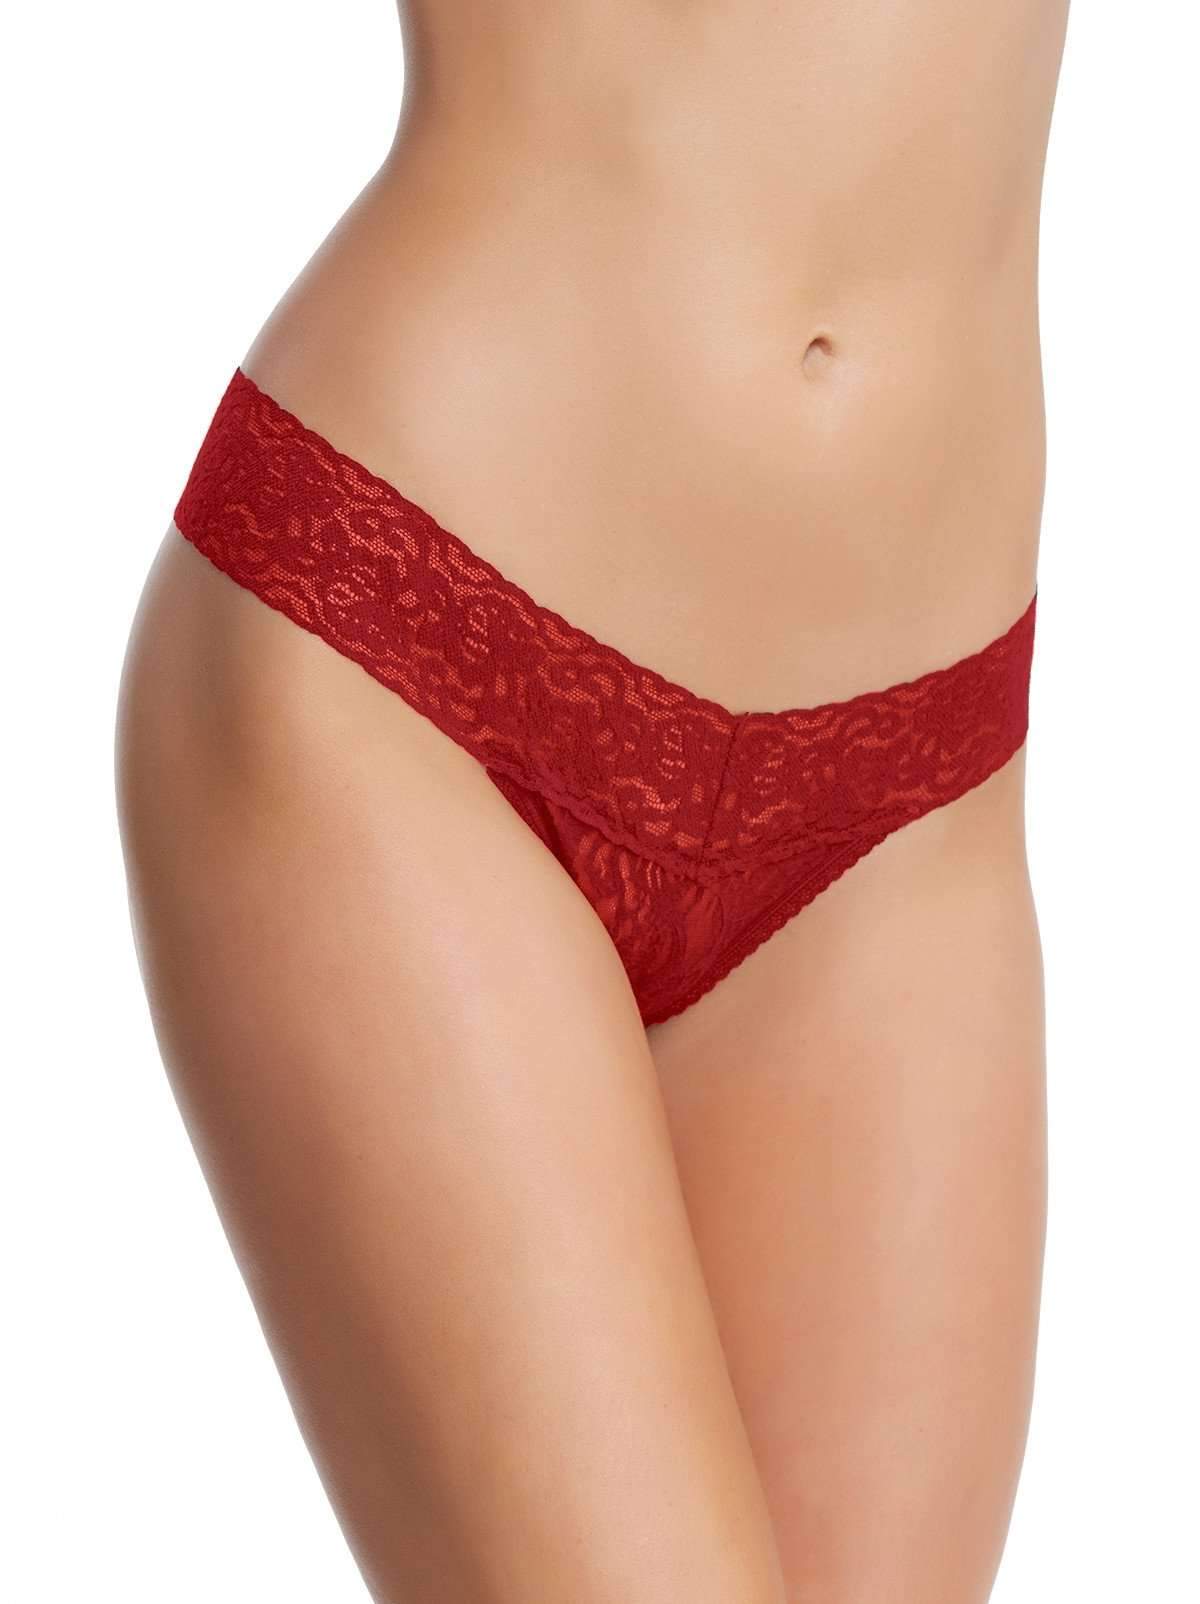 Stretch Lace & Strappy Elastic Open Front Thong Panty Red L/XL